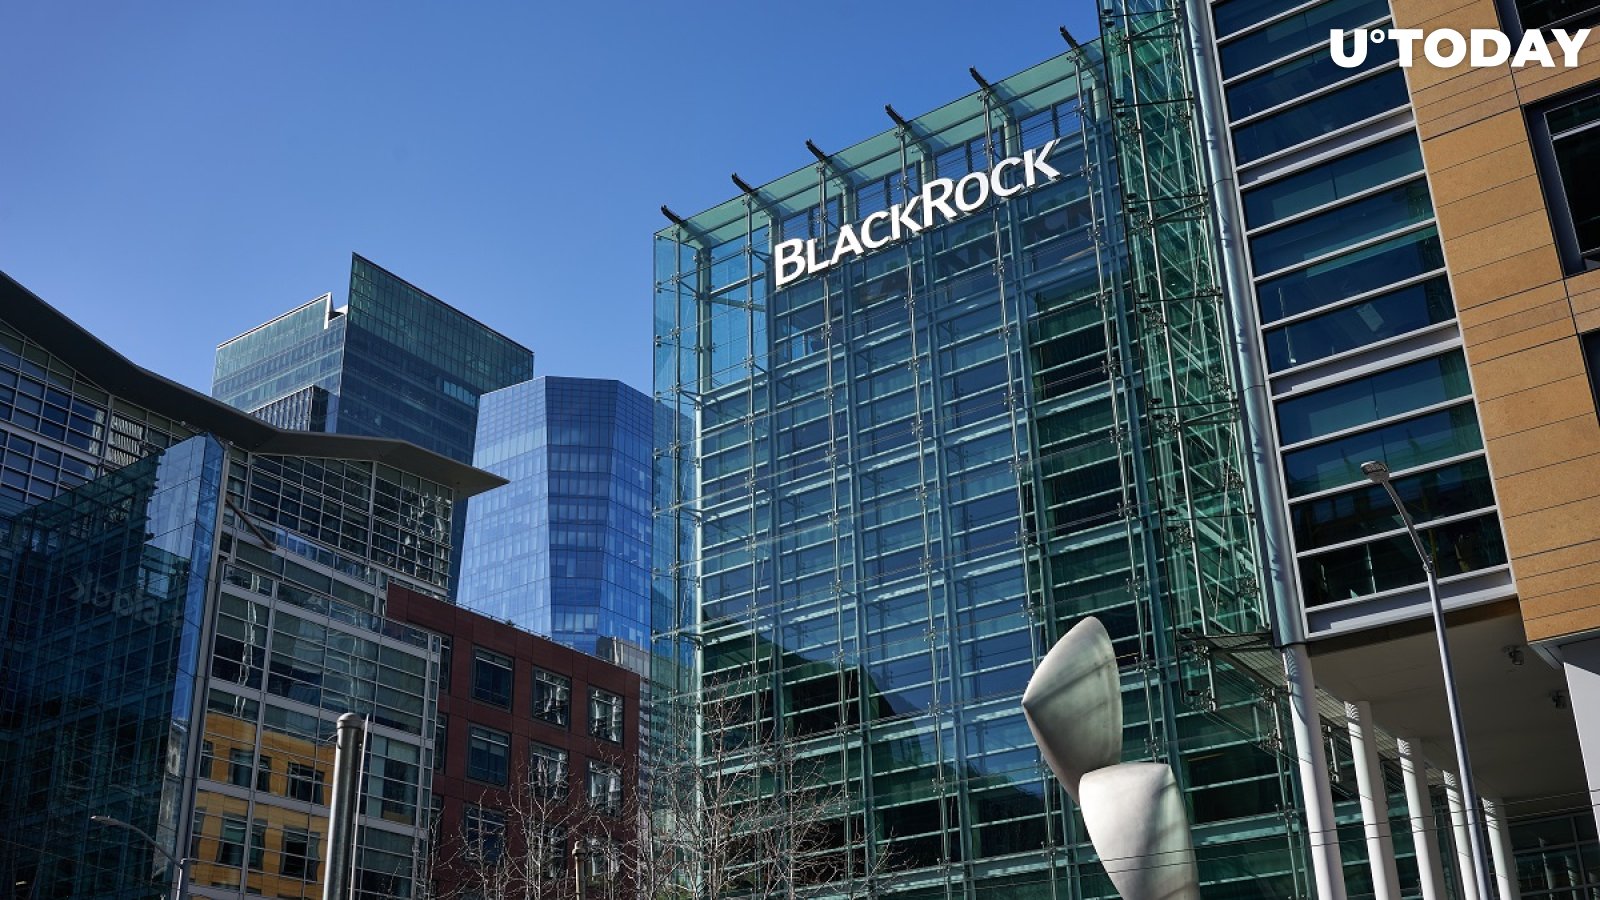 BlackRock to Offer Crypto Trading: Report